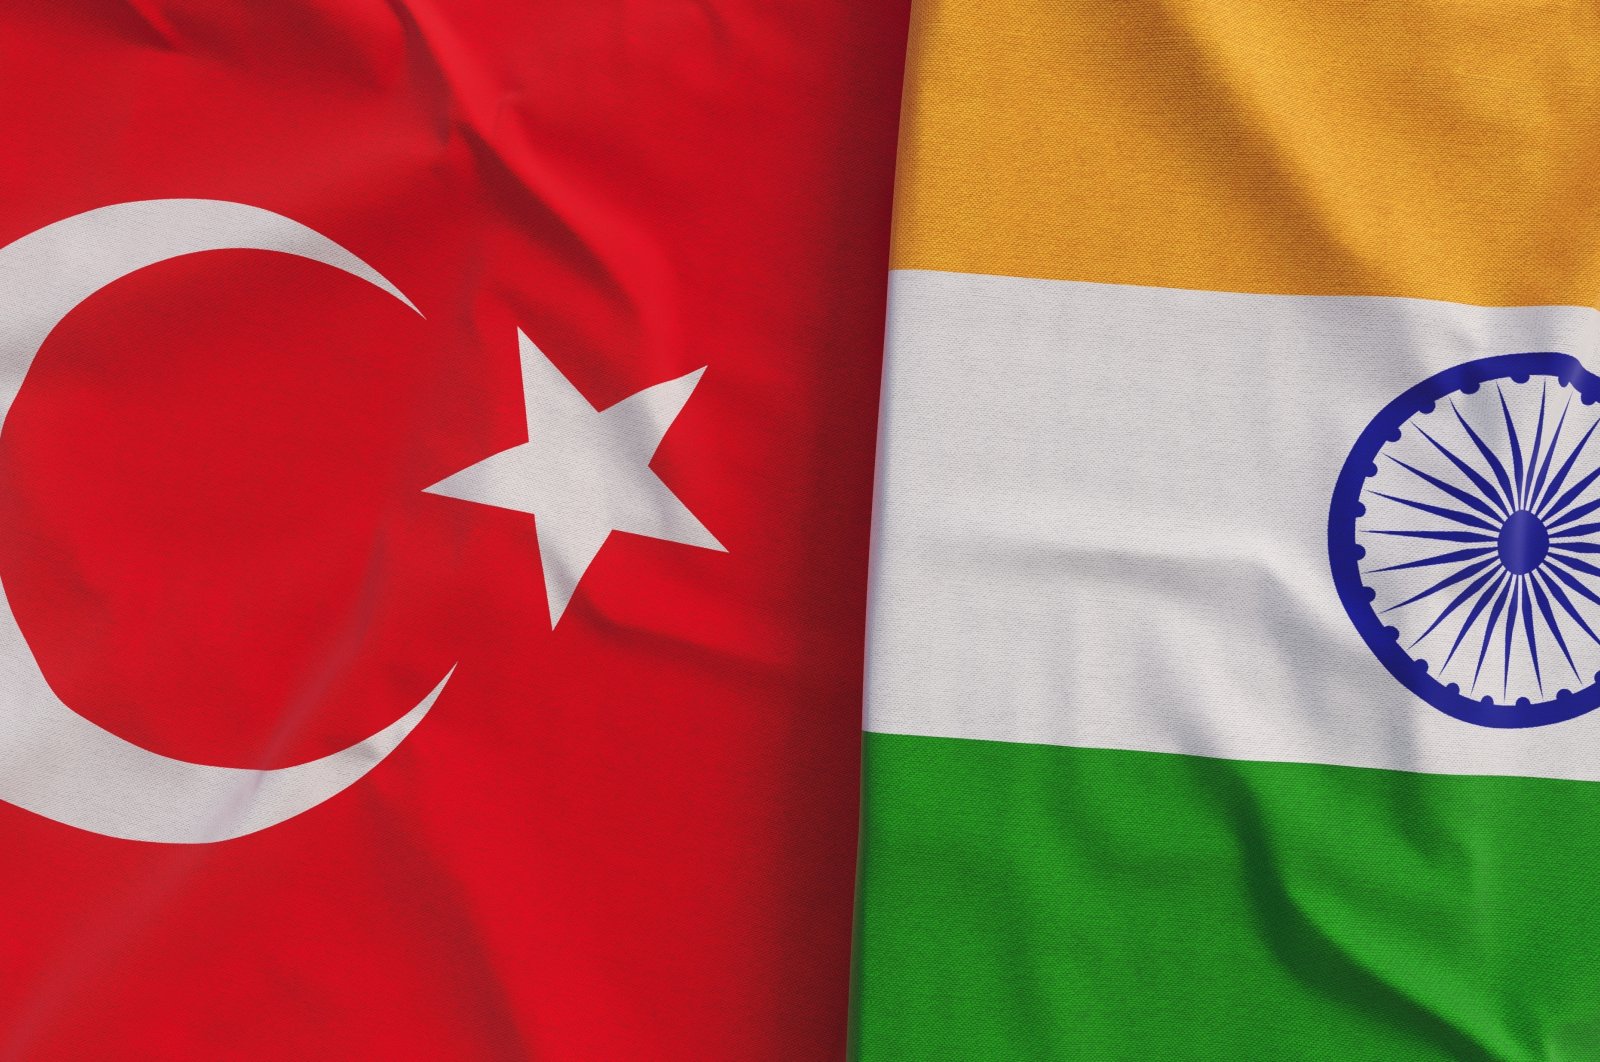 The Turkish and Indian flags seen together. (Illustration by Shutterstock)